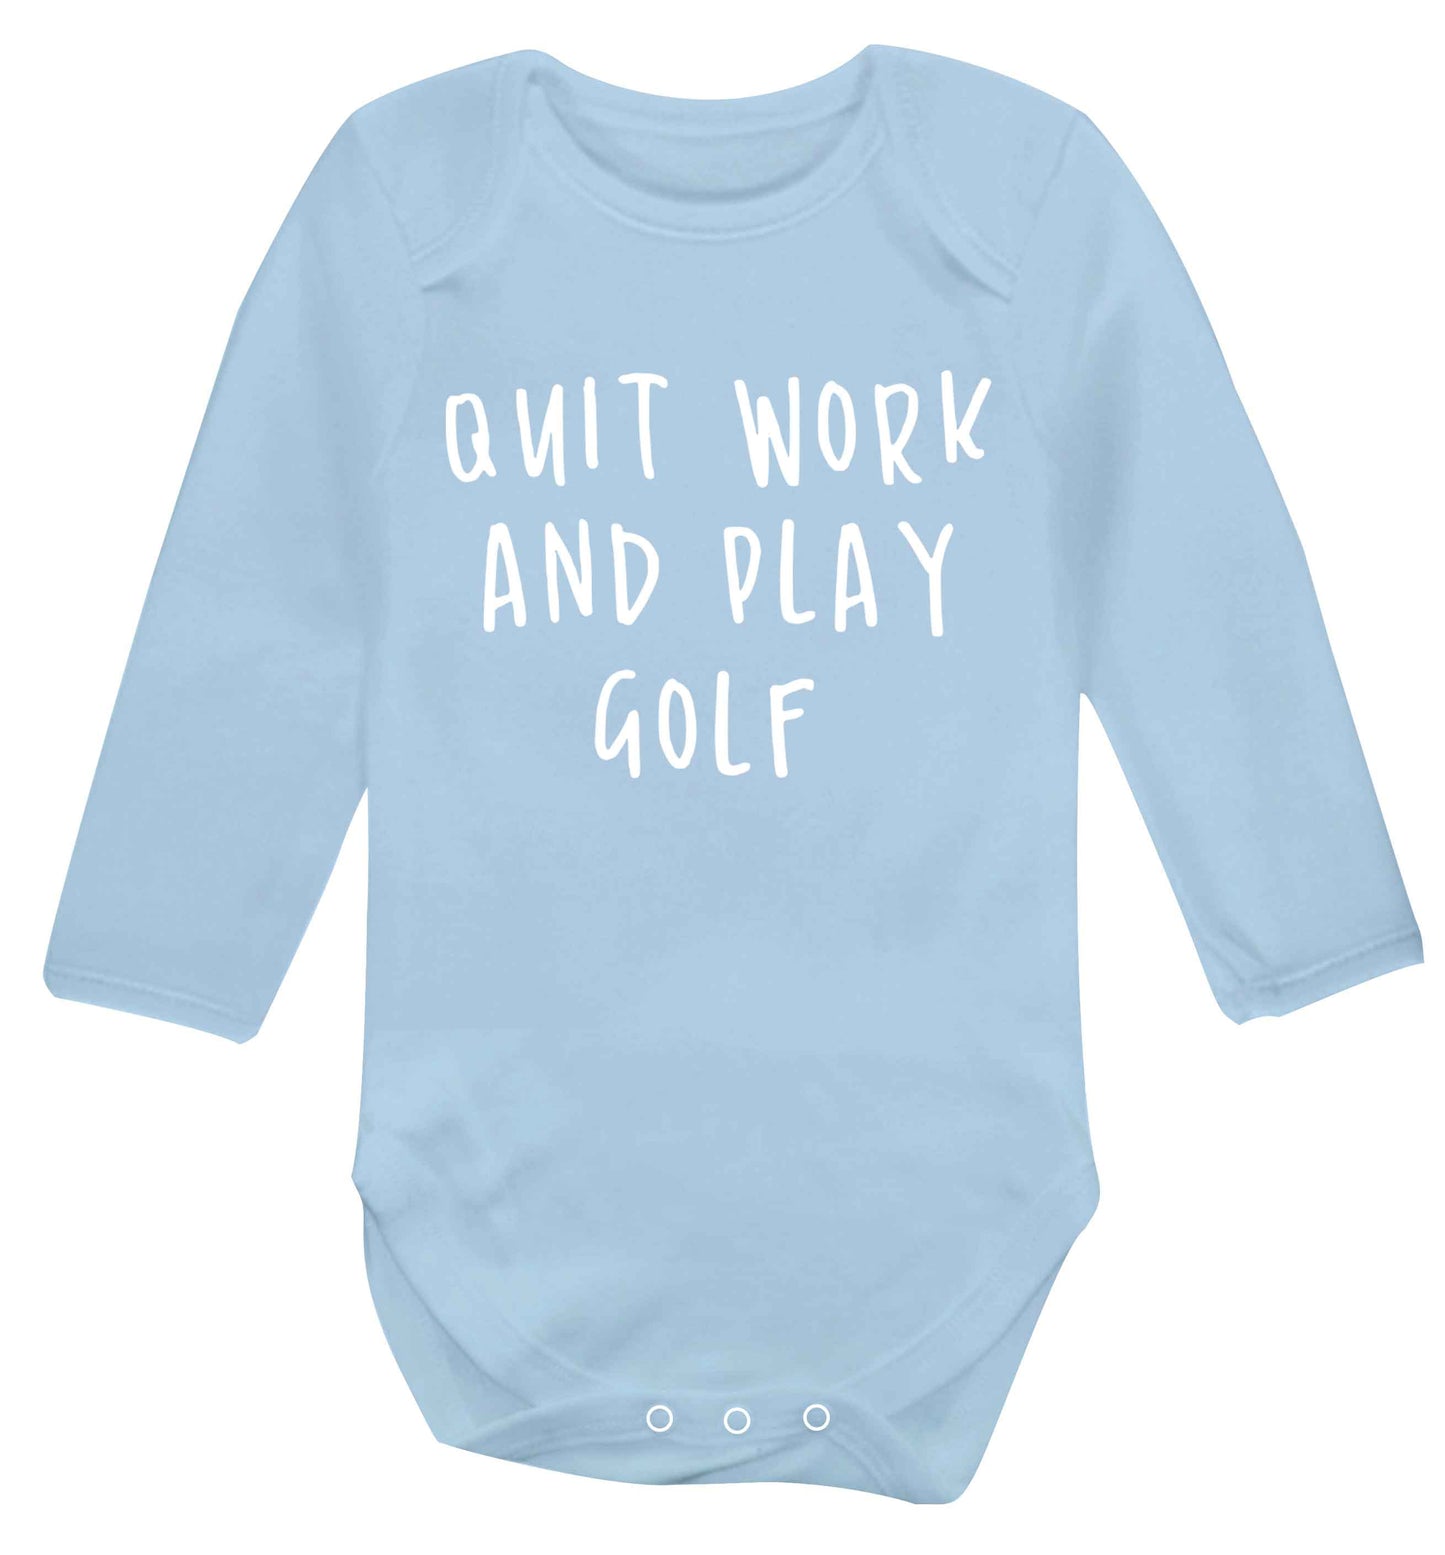 Quit work and play golf Baby Vest long sleeved pale blue 6-12 months